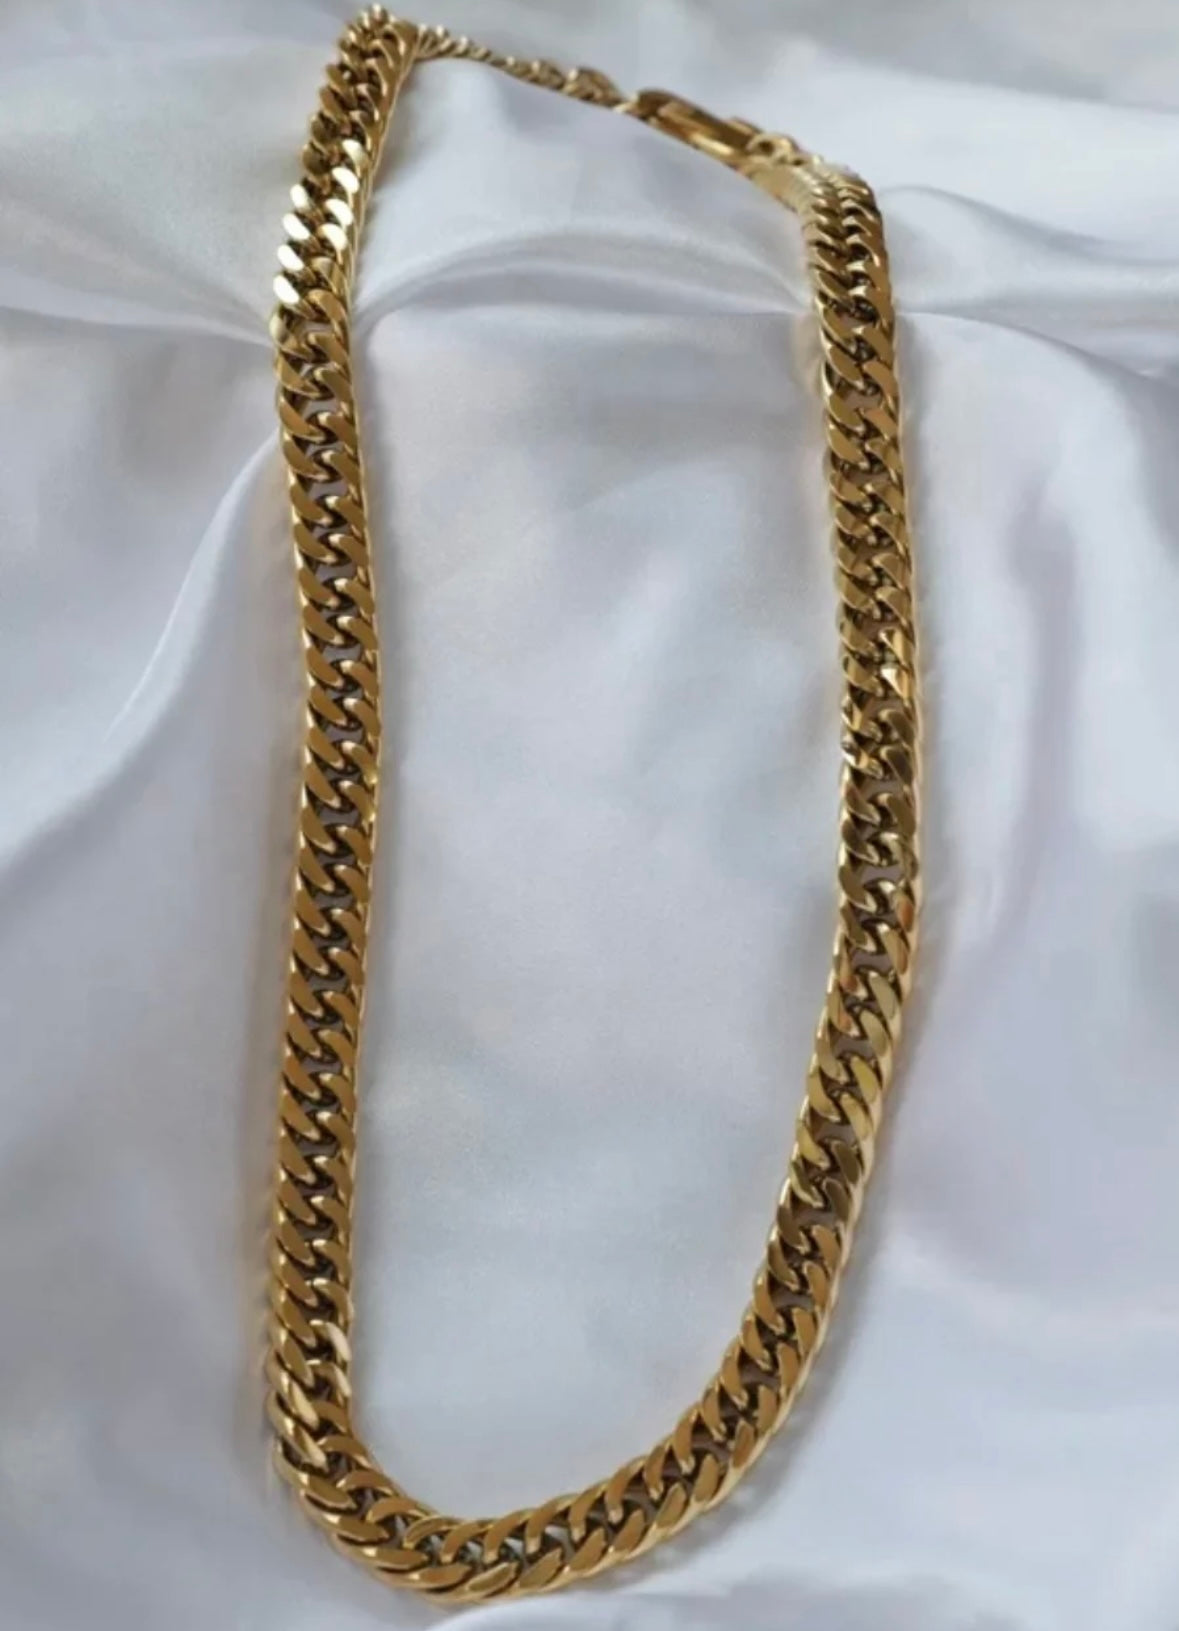 Gold Chains - Water Resistant